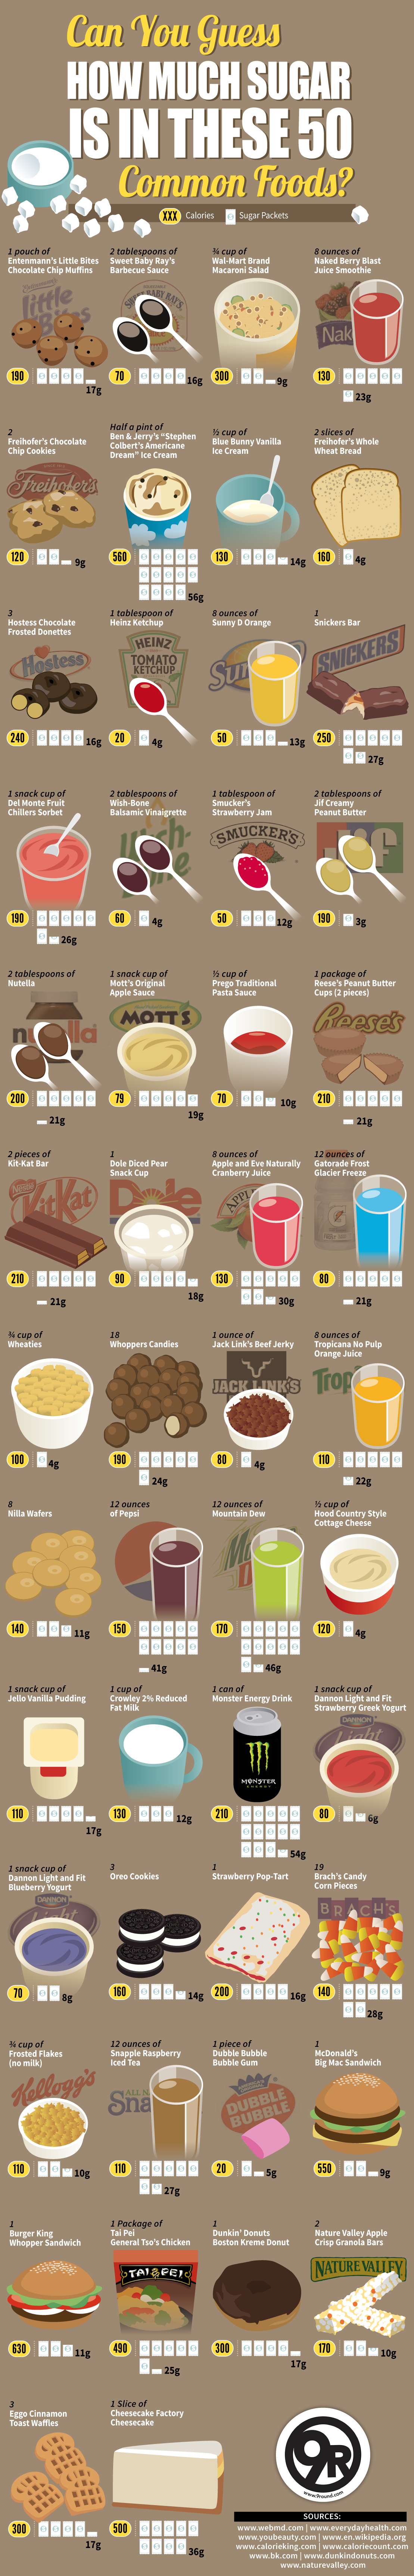 Can You Guess How Much Sugar is in These 50 Common Foods?